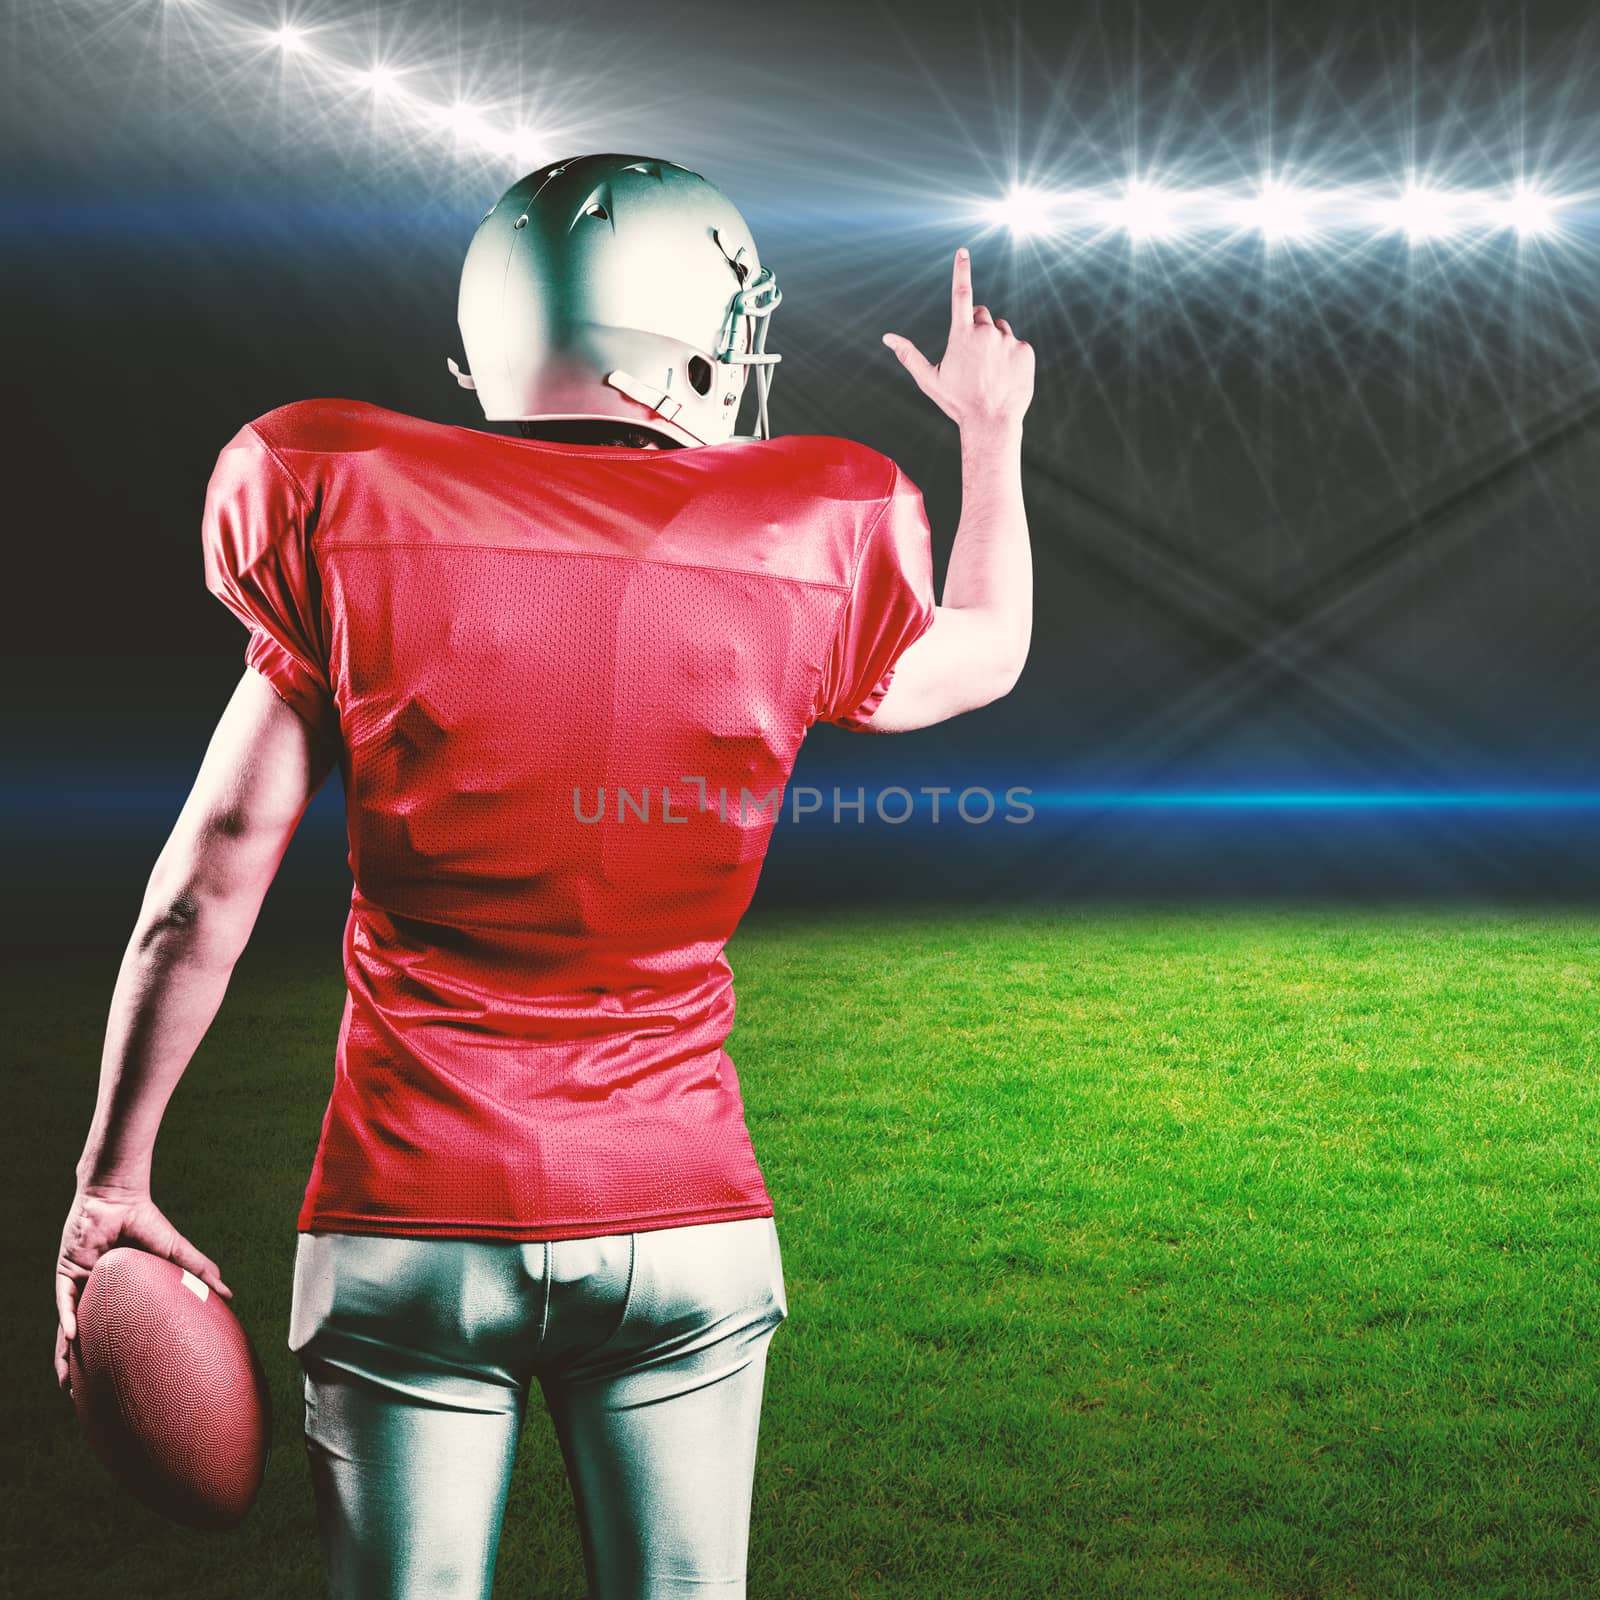 Rear view of American football player pointing while holding ball against rugby stadium